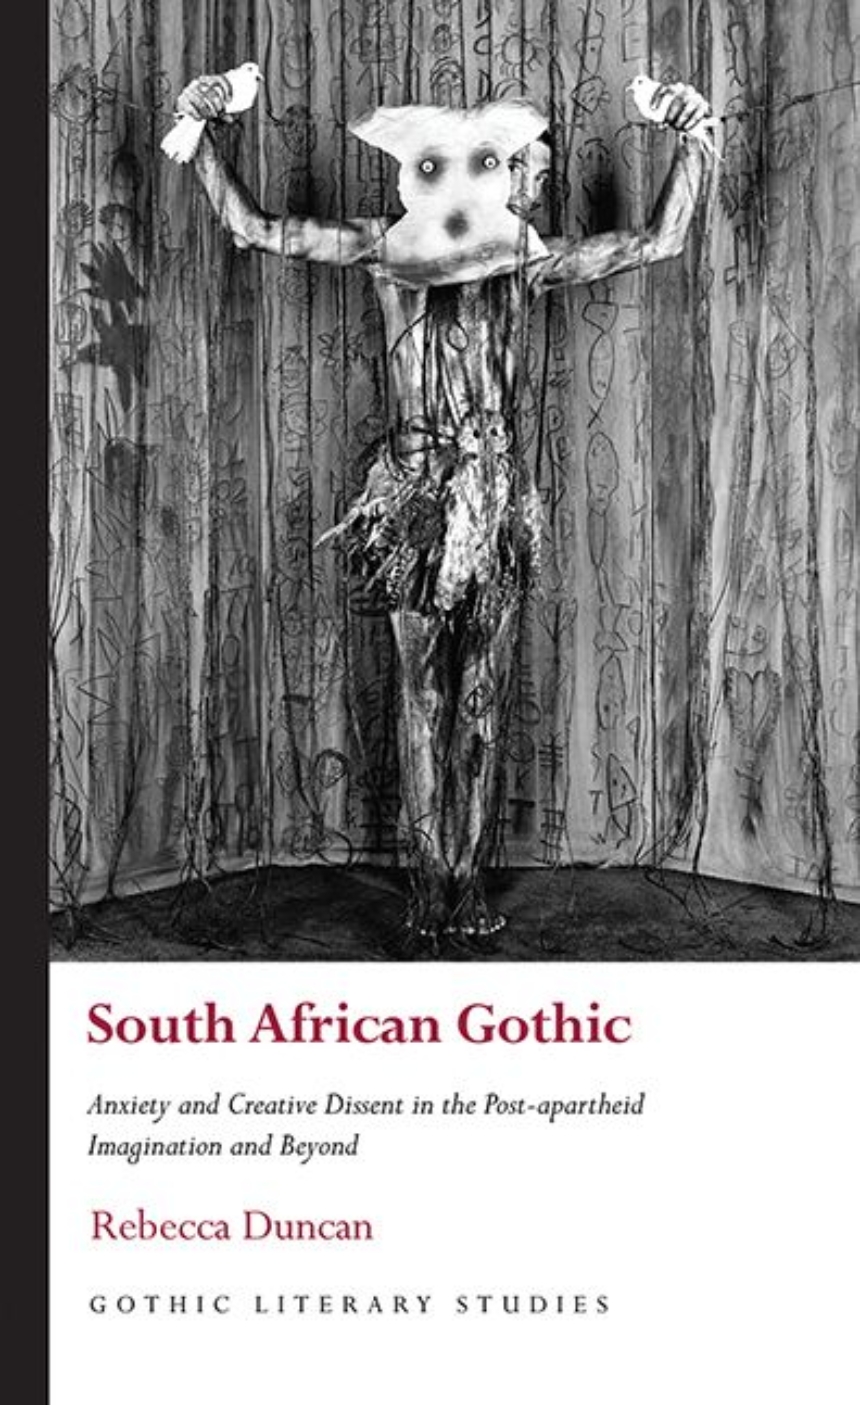 South African Gothic